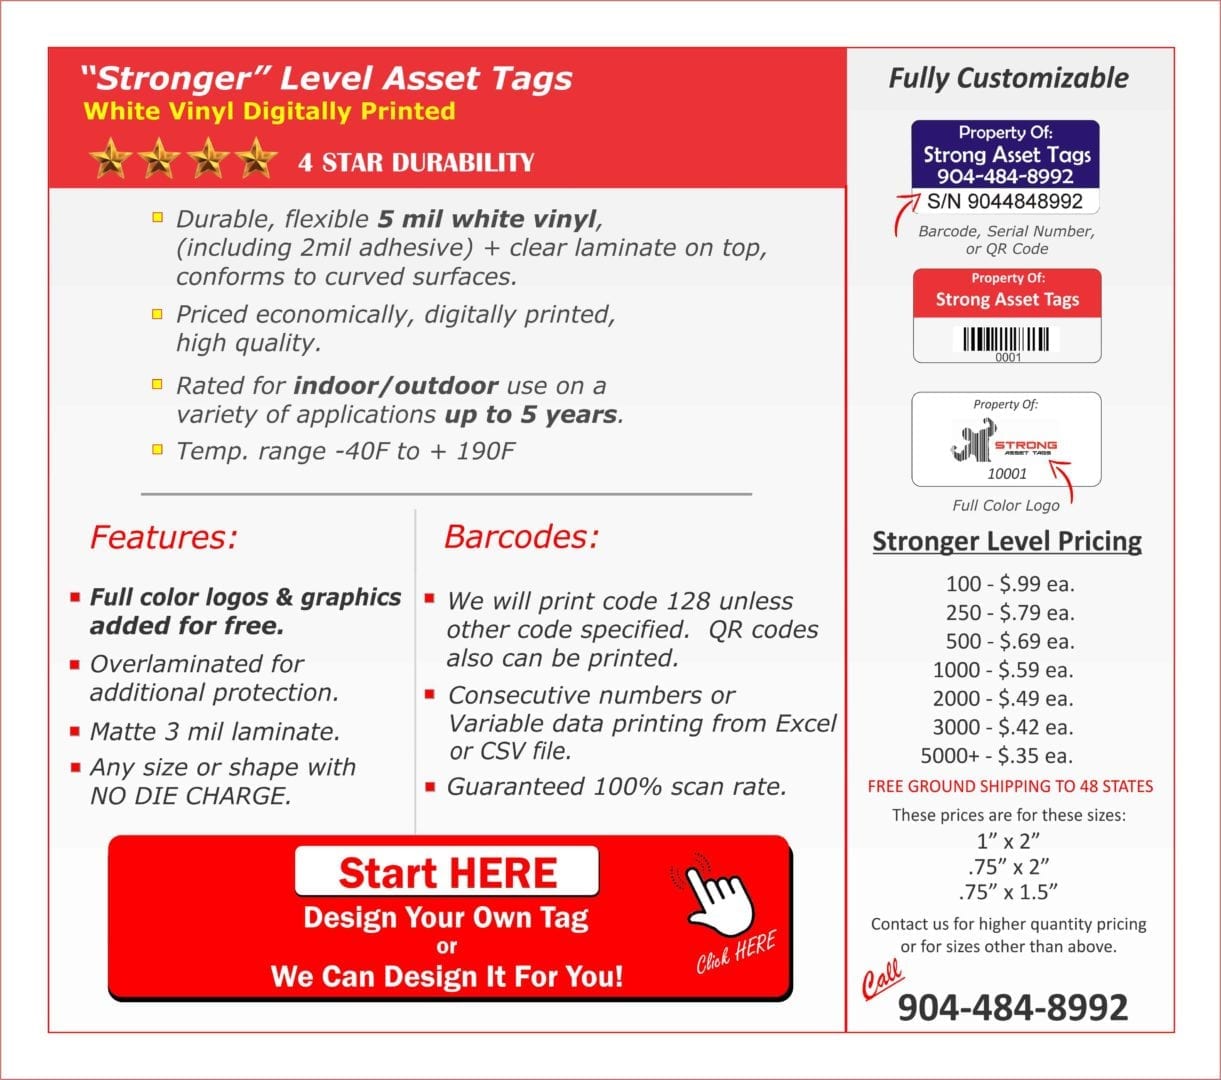 here are the features of our stronger level asset tags